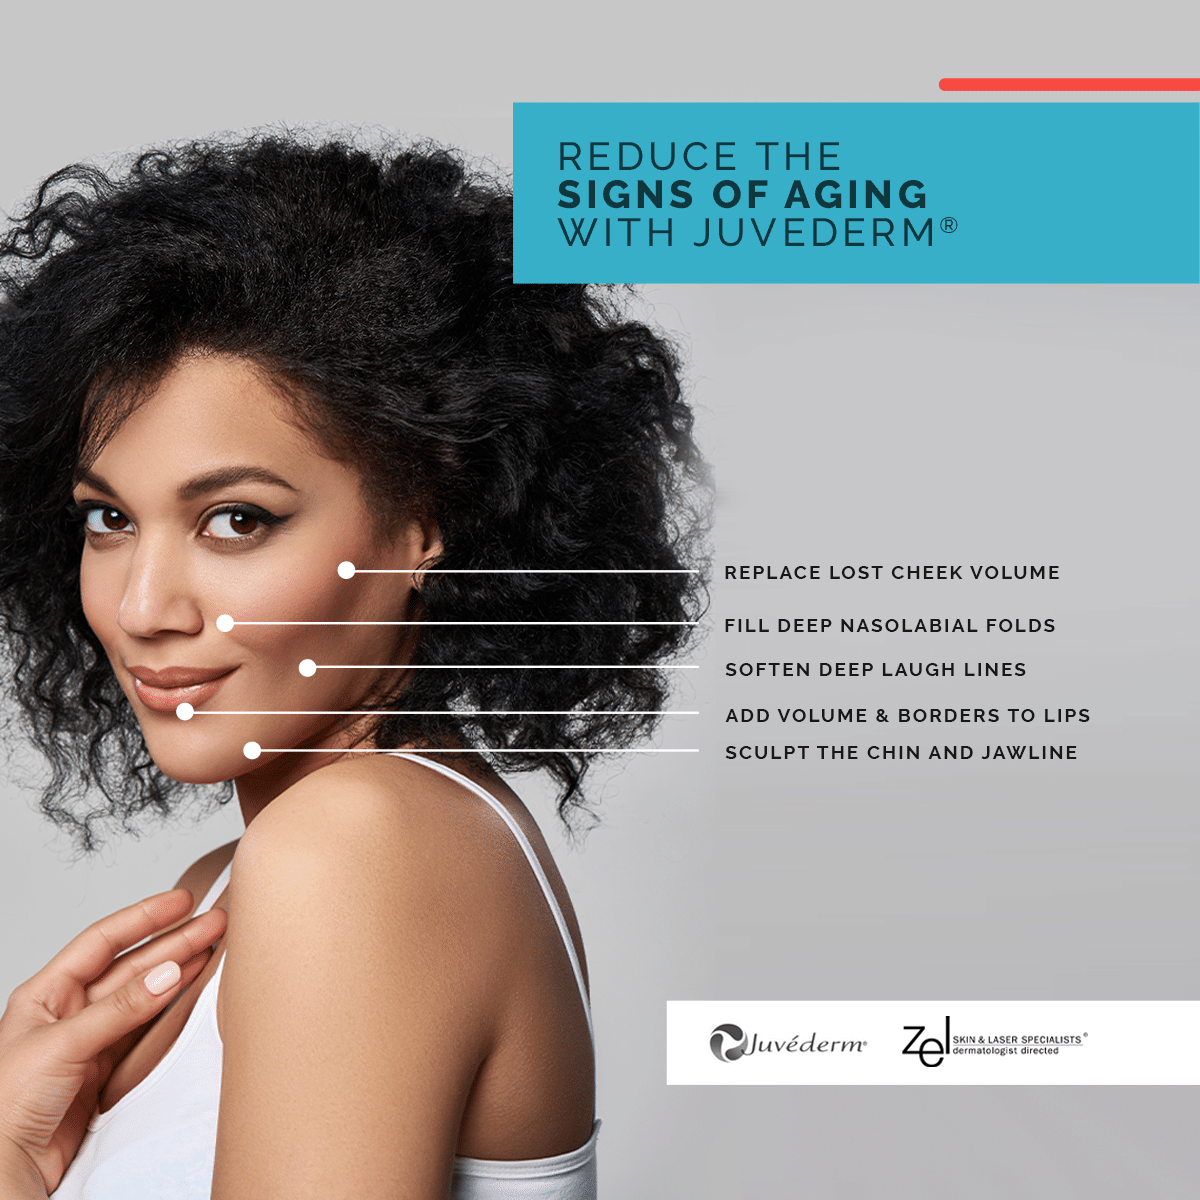 With Juvederm®, a hyaluronic acid-based dermal filler, the Minneapolis area's Zel Skin & Laser Specialists team can address a range of signs of facial aging.